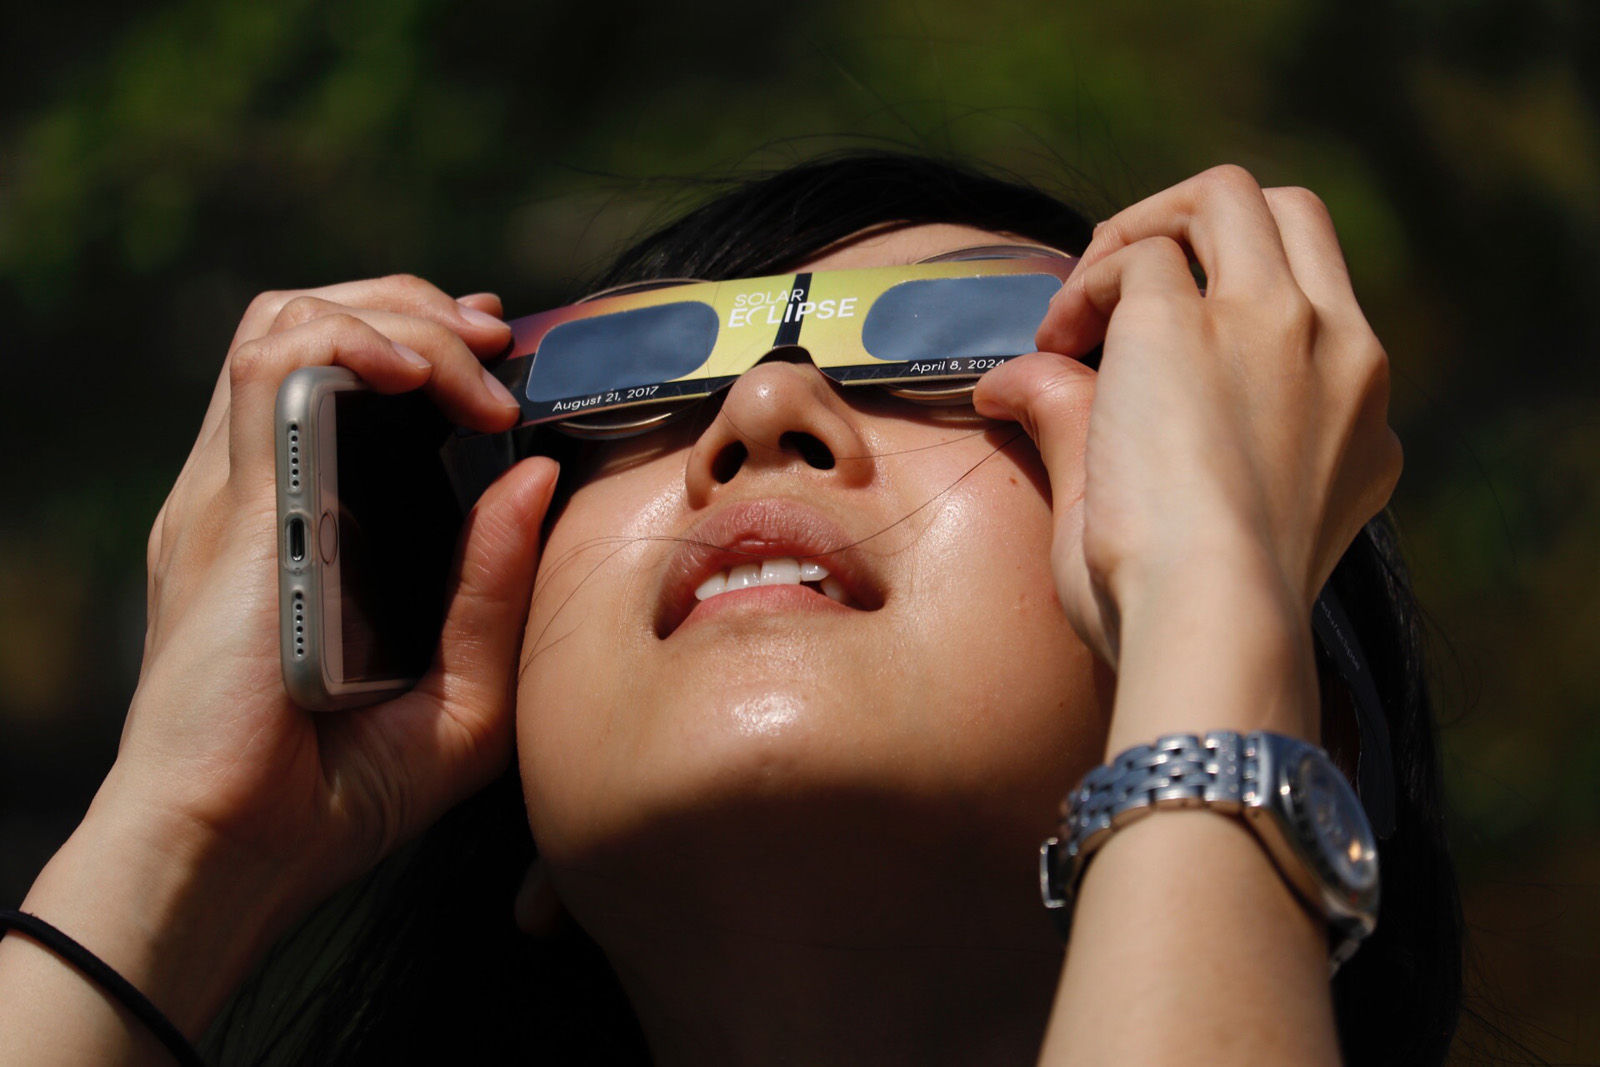 Stellar Chen, who has a name that was singularly appropriate for today's event, takes in the solar eclipse in D.C. (WTOP/Kate Ryan)